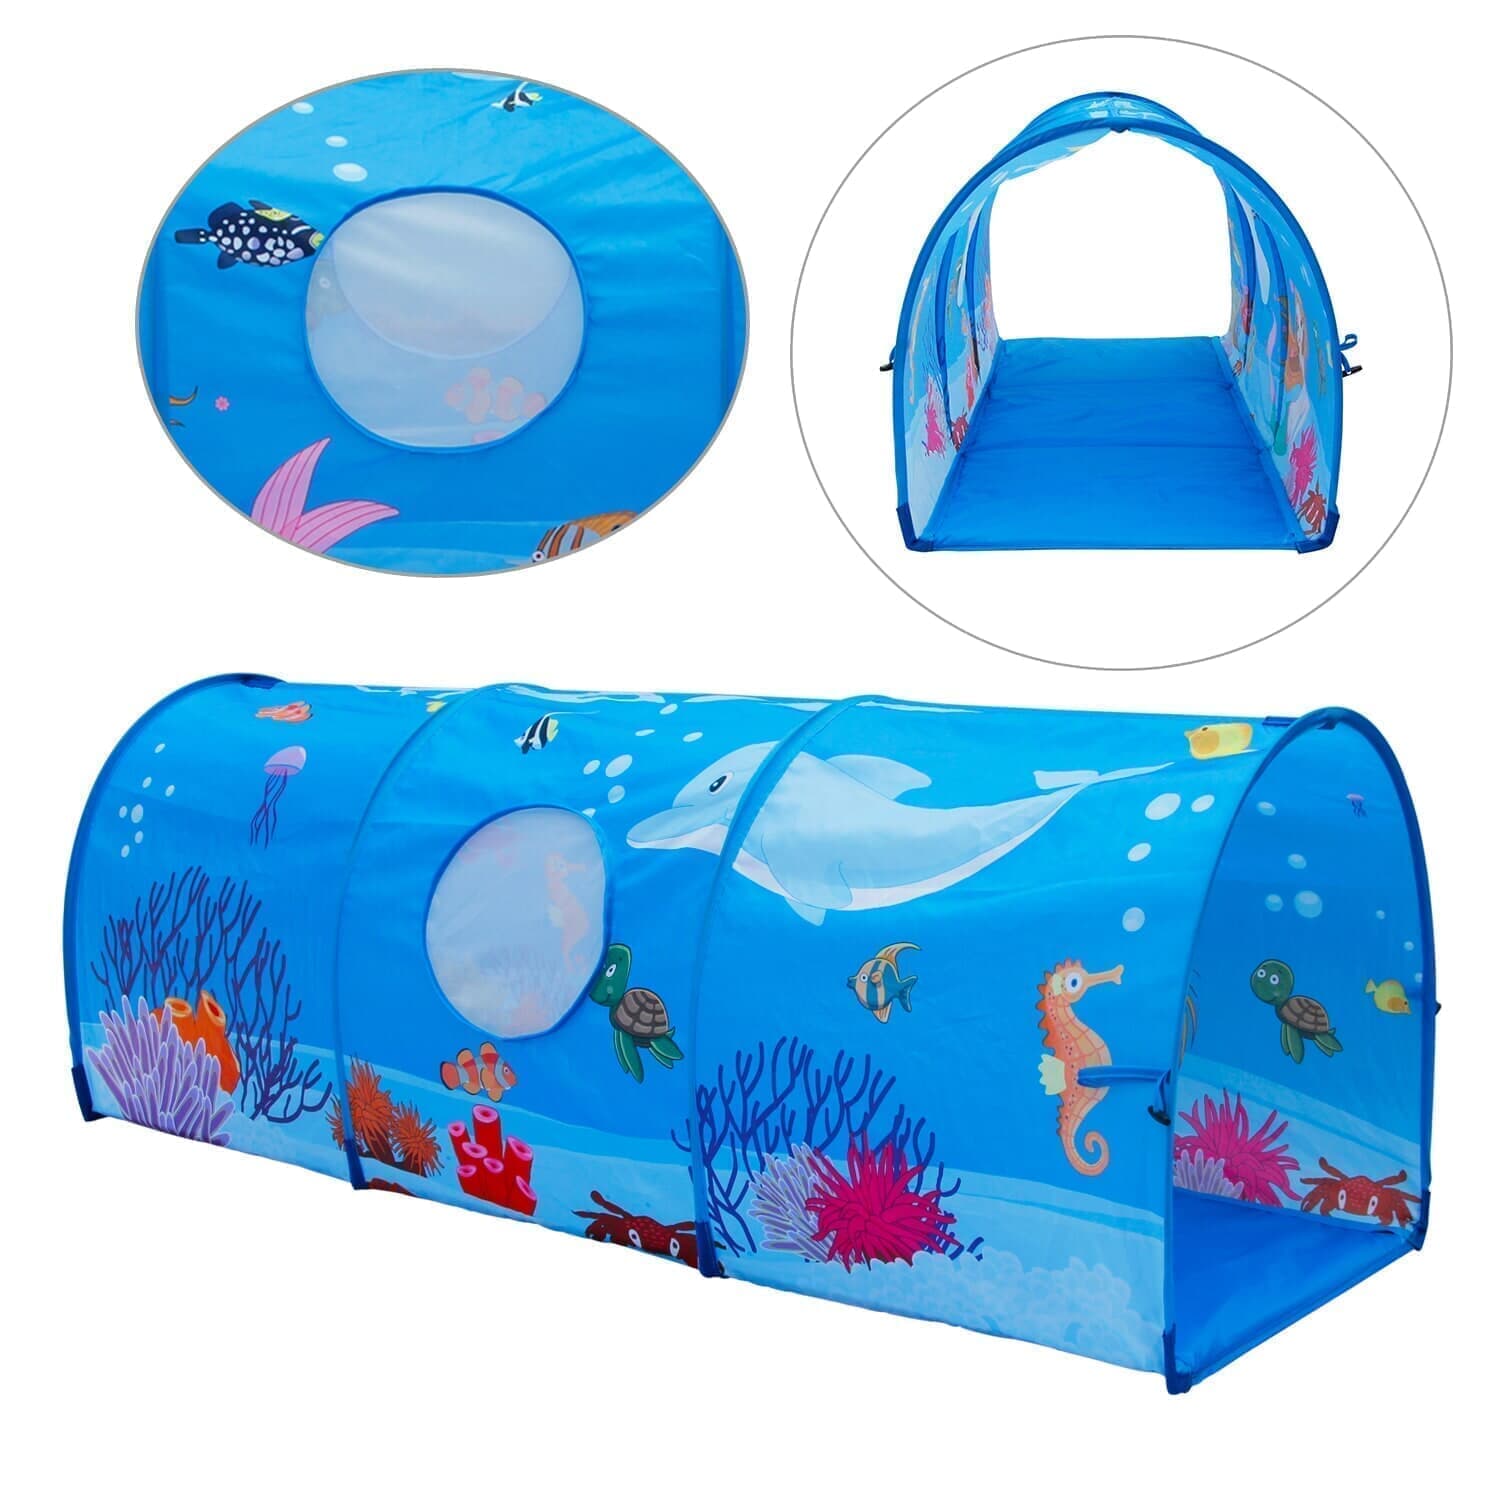 Homfu Play Tent for Kids Playhouse for Children Boys Popup Tent (Ocean Blue) Homfu 2 in 1 kids play tent with tunnel outdoor indoor playhouse kids play tent,Toddler Tunnel